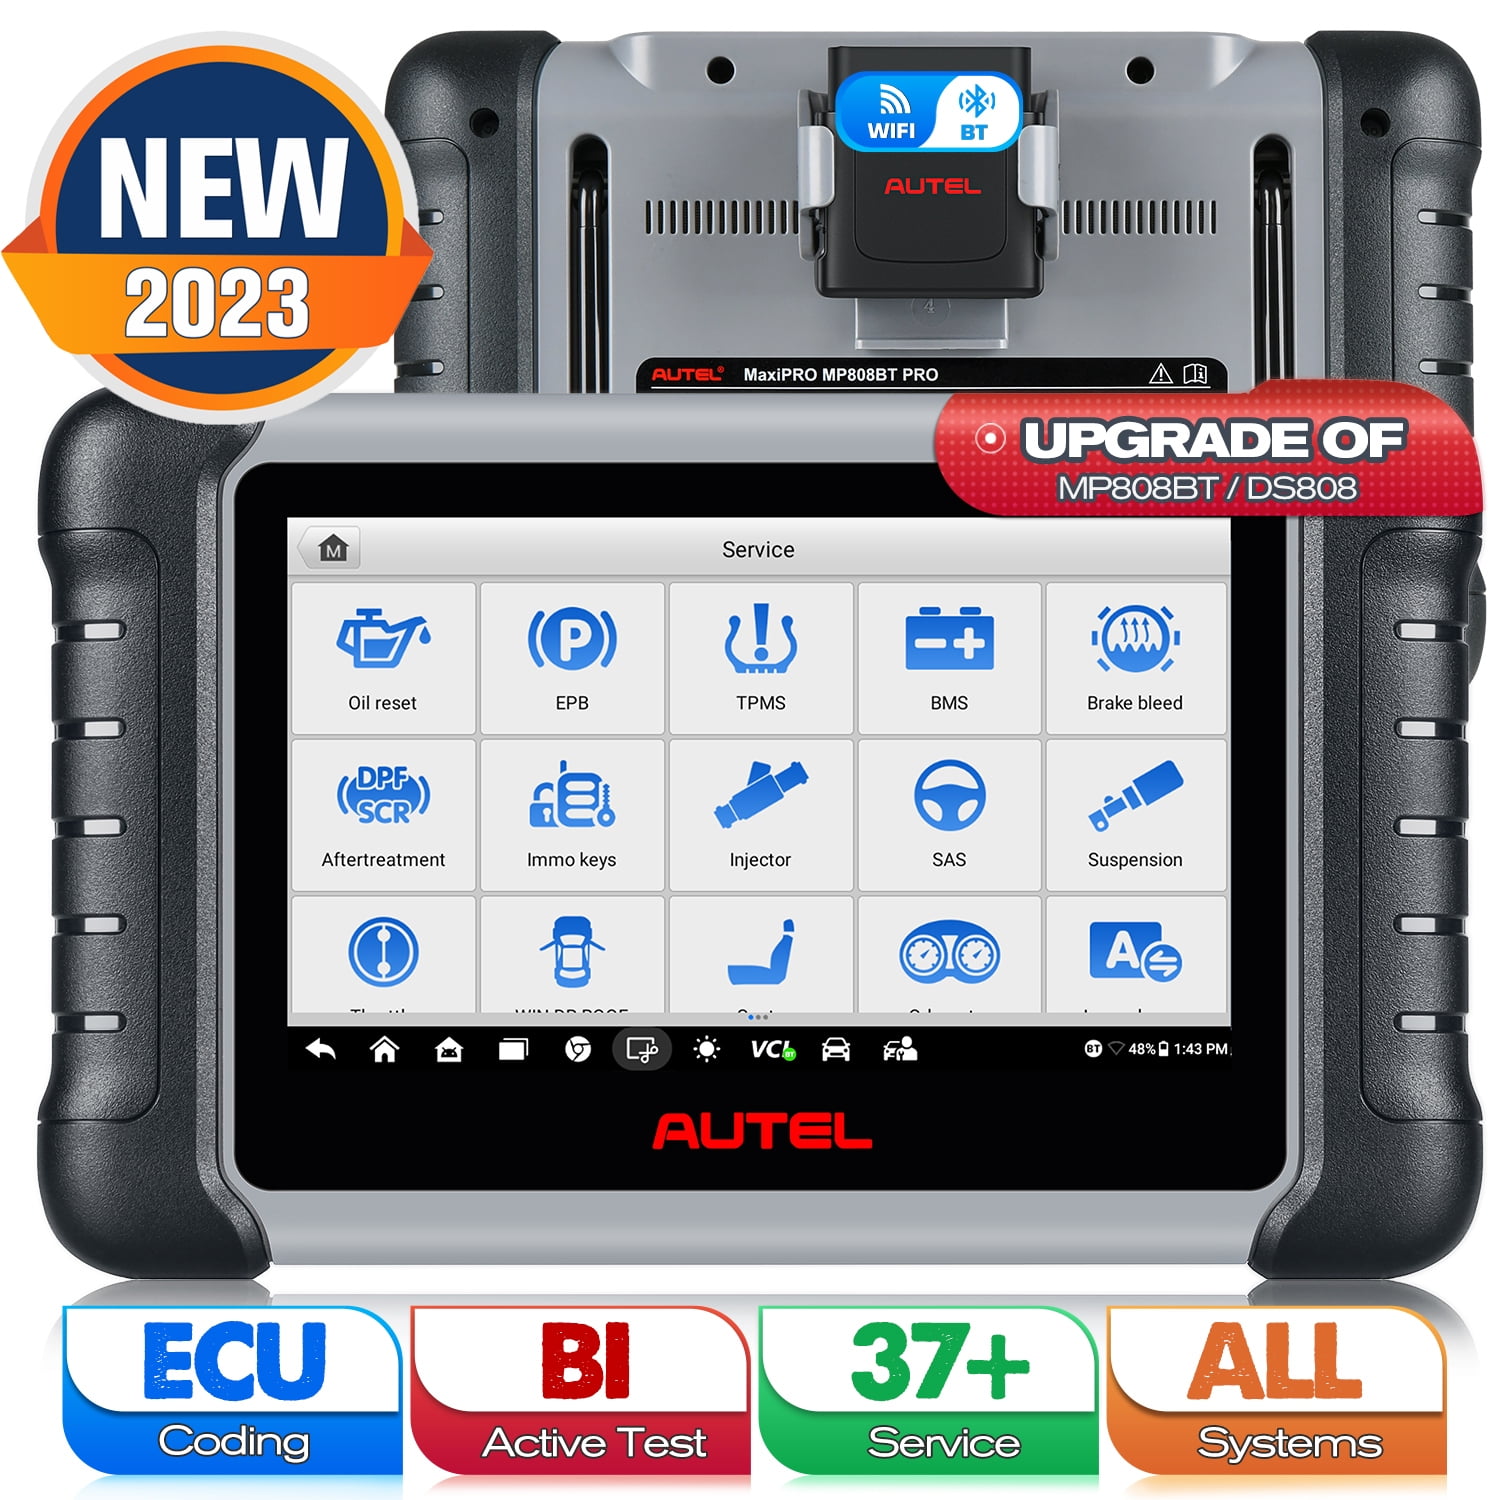  2023 Newest Autel MaxiPRO MP808S Car Diagnostic Scan Tool,  Scanner with Bi-Directional Control, 30+ Services, ECU Coding, Upgraded  Version of MP808K/MP808BT/DS808, Work with MV108S, 2-Year Free Update :  Automotive